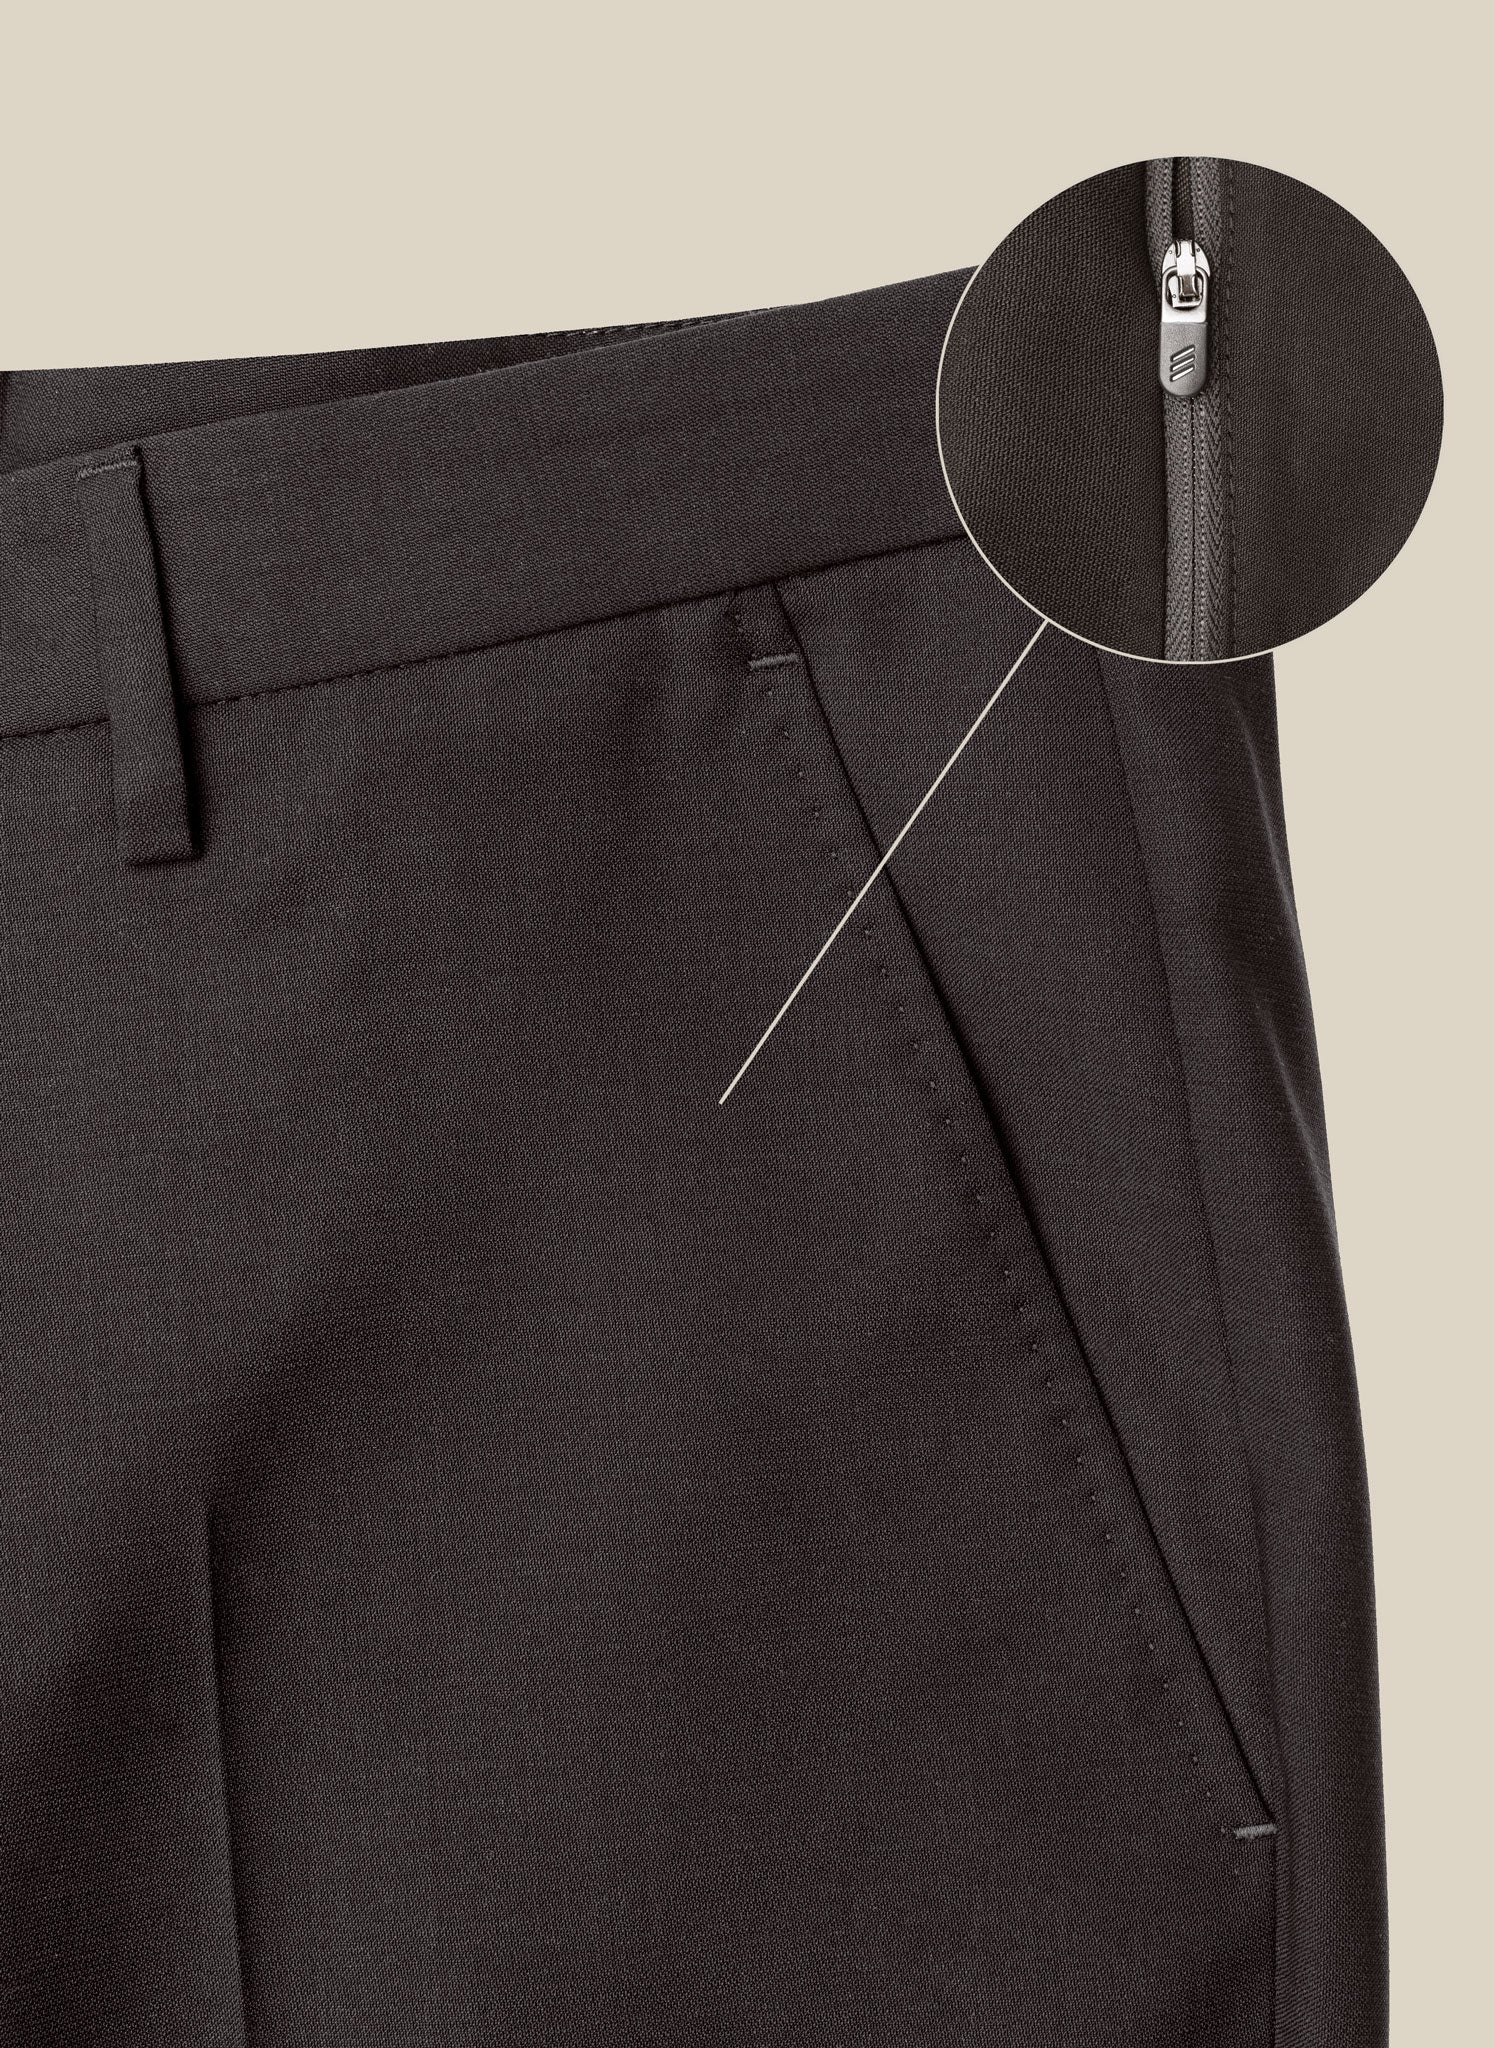 Versatile men's grey wool trousers with button-through back pockets and functional front pockets